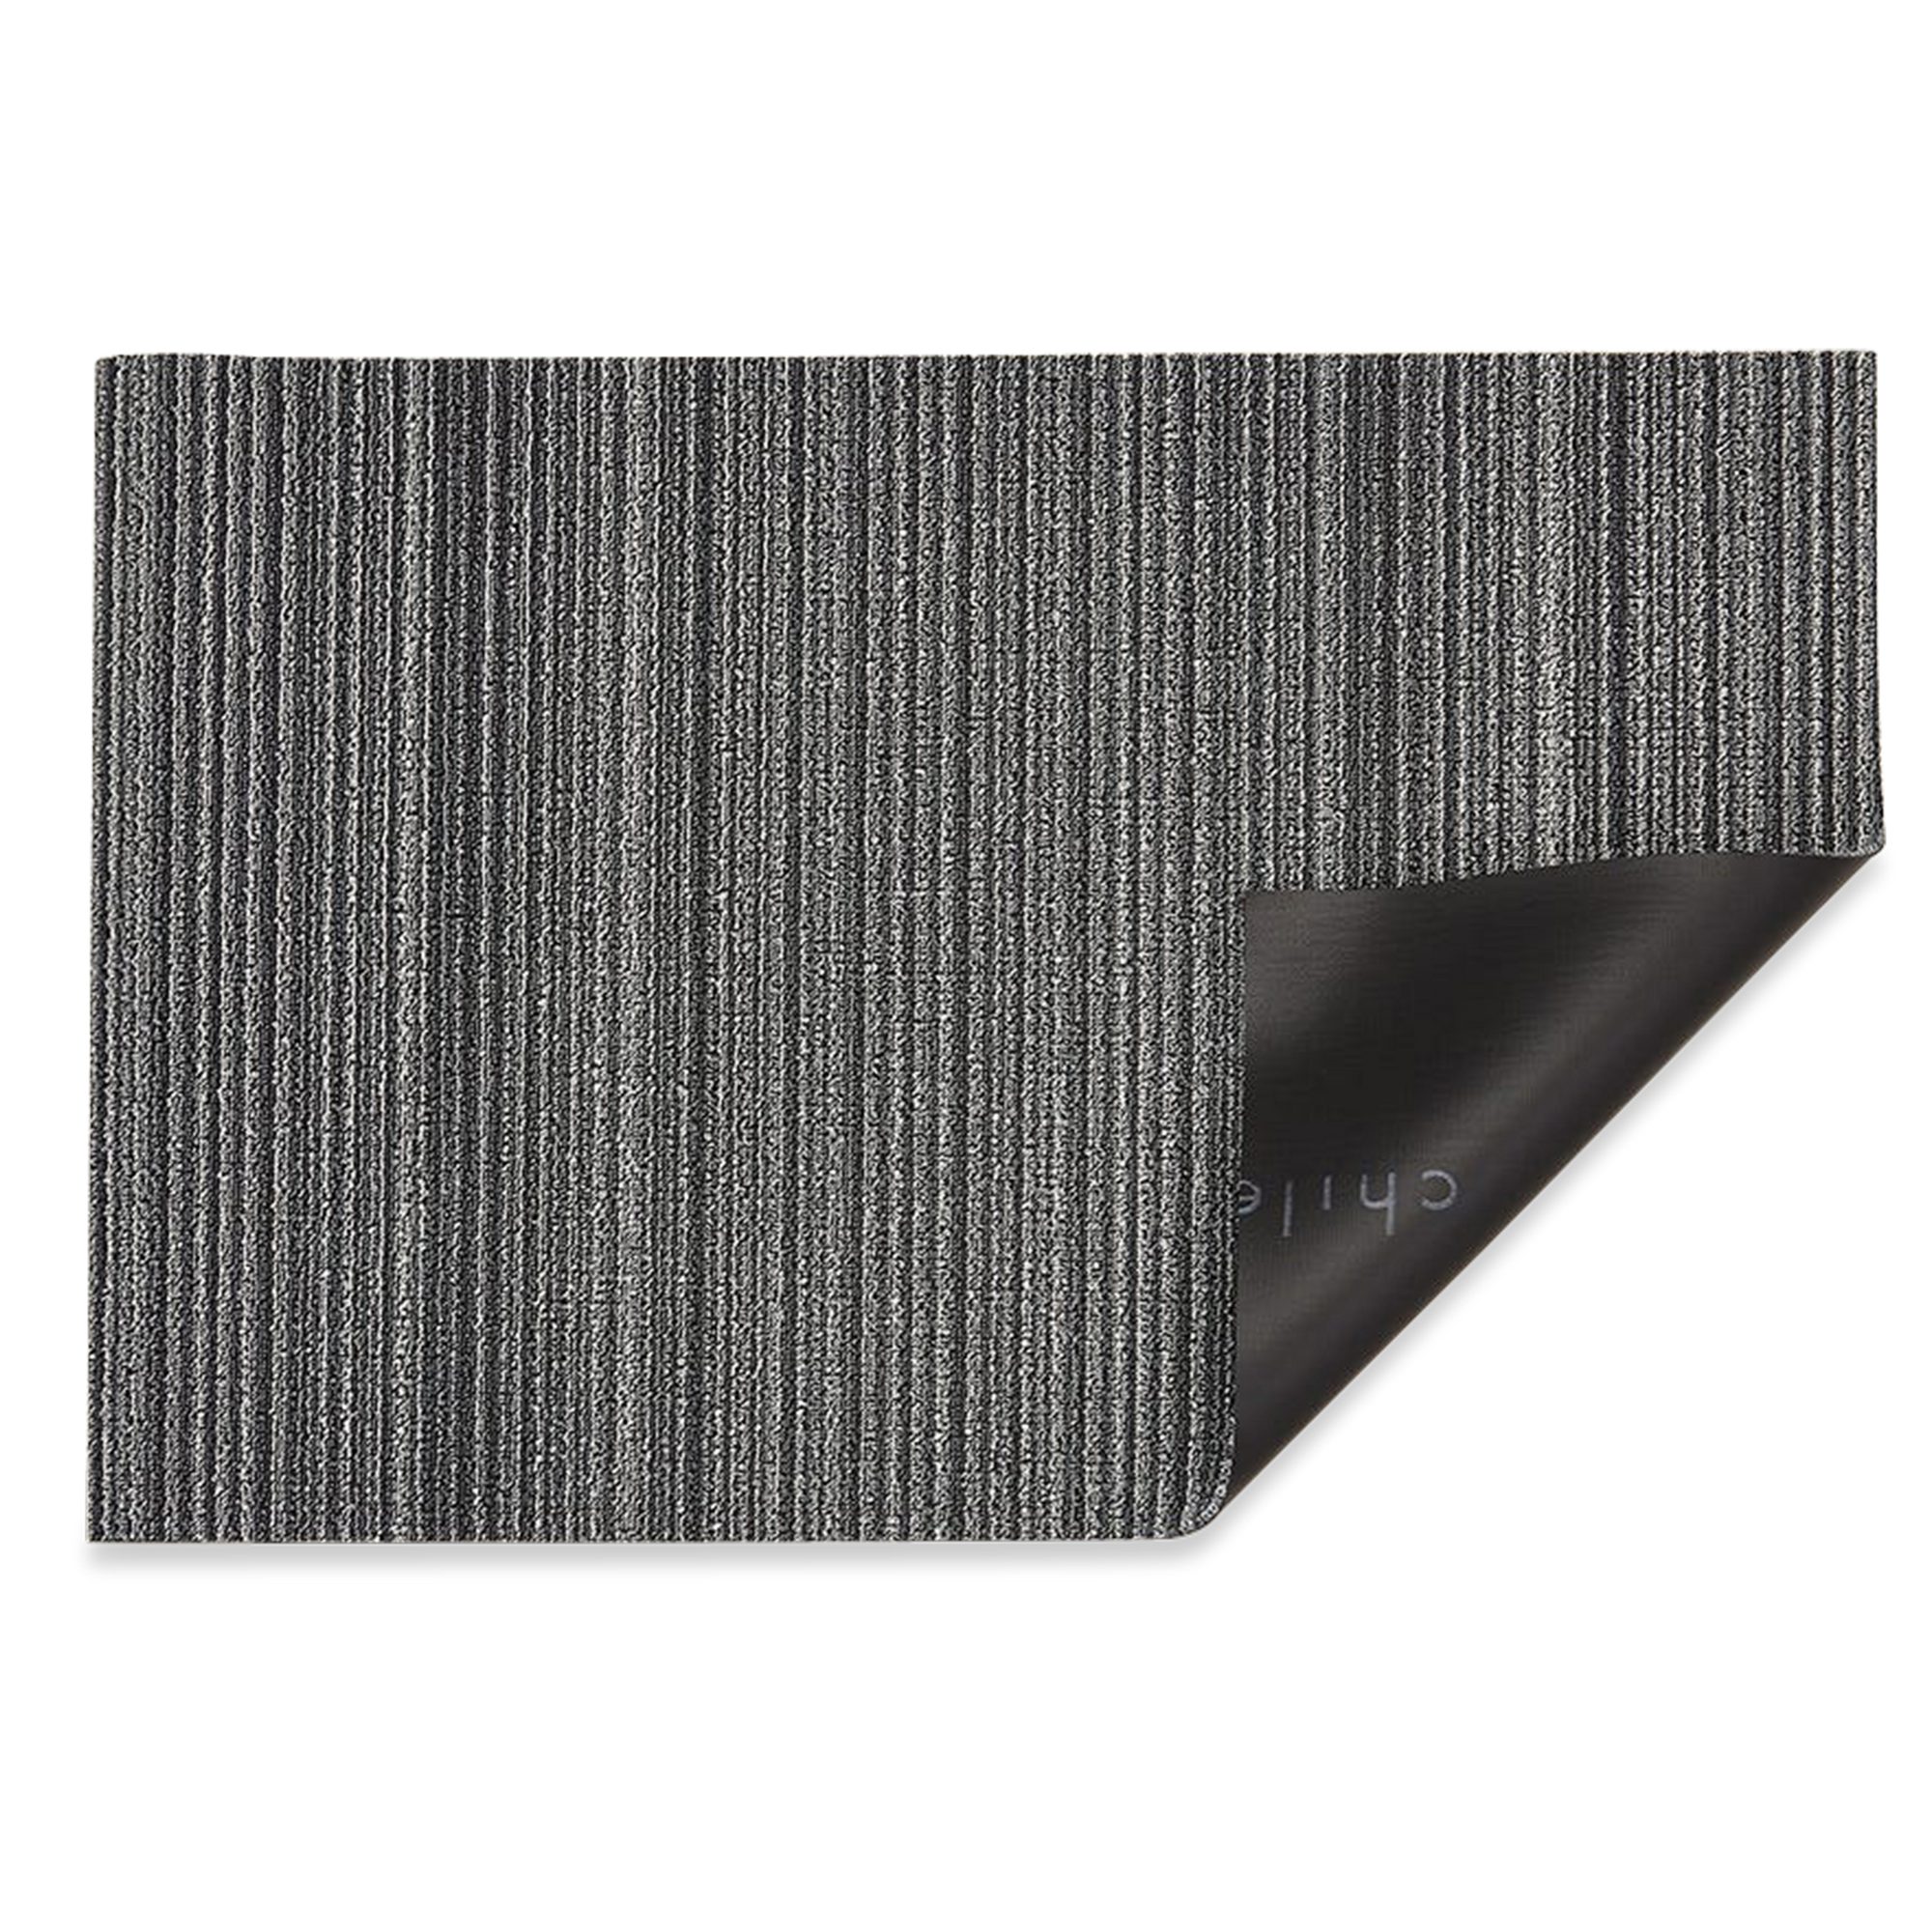 Hardworking, beautiful and functional, Chilewich shag mats are ideal for use in kitchens, bathrooms, mudrooms, outdoor terraces, patios, pool areas and entryways.